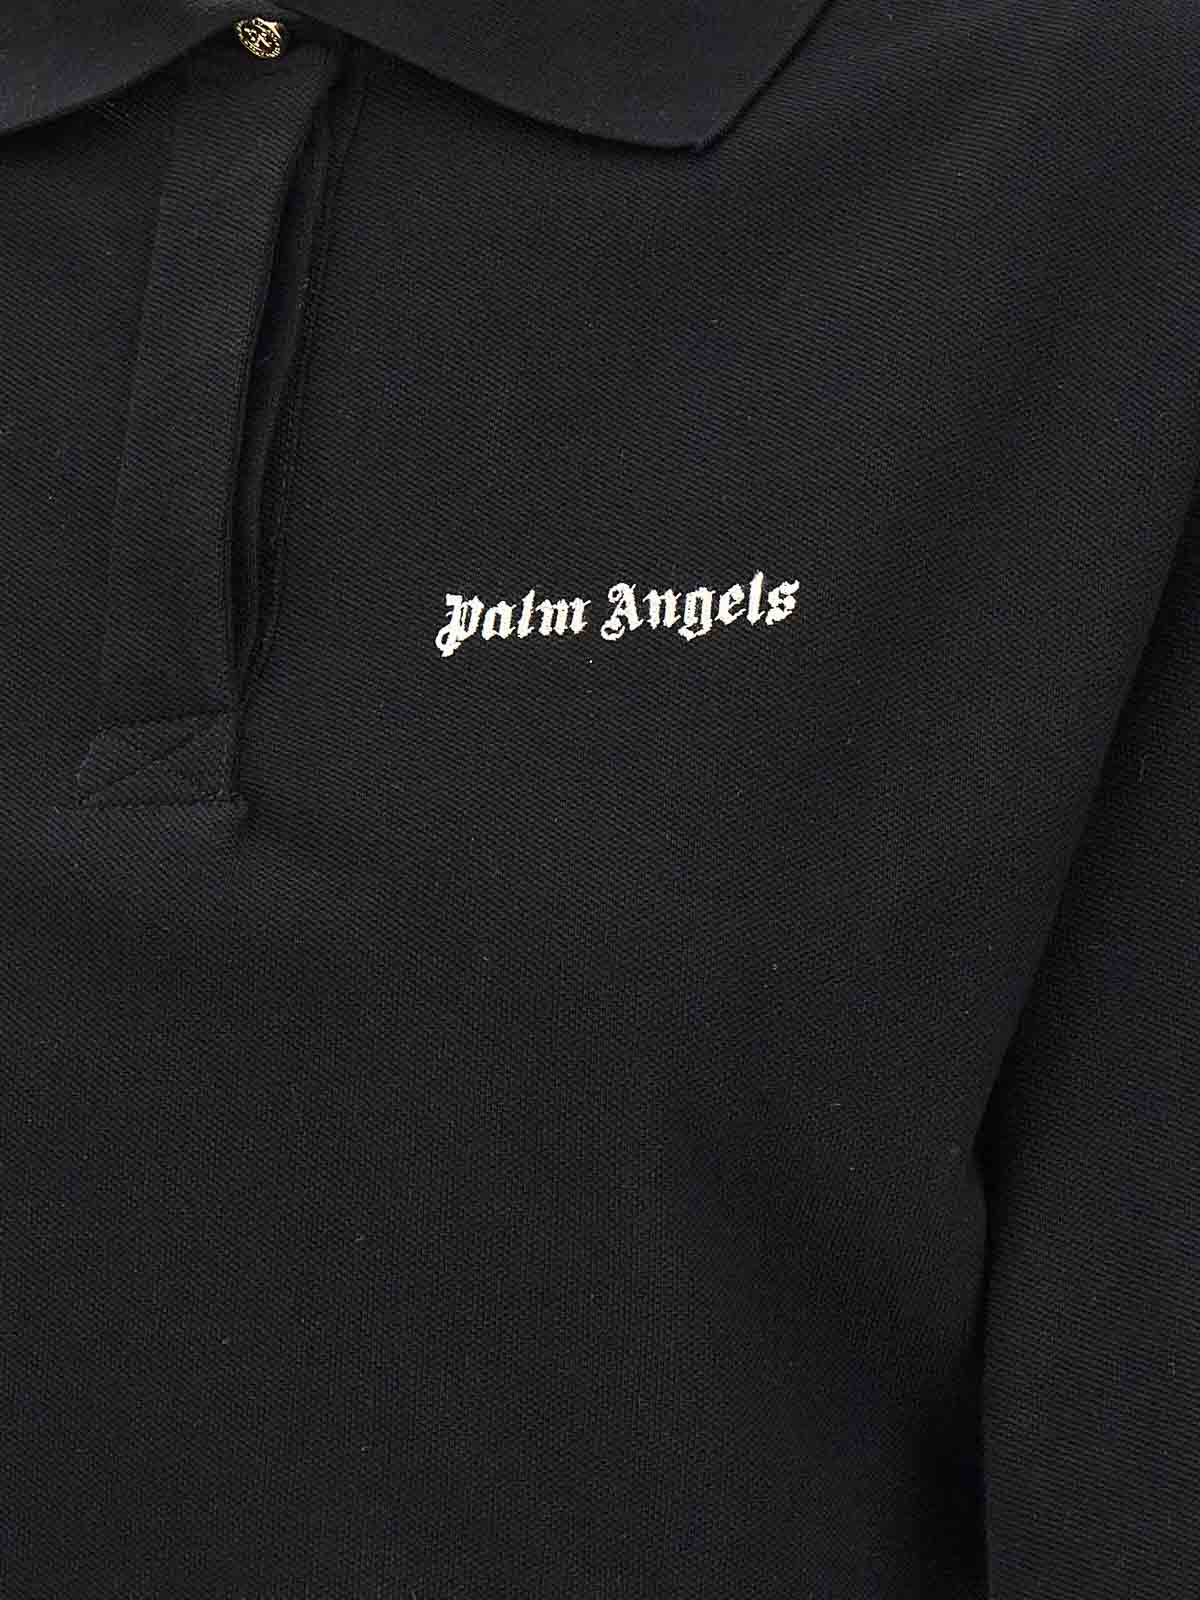 Shop Palm Angels Crop Polo Shirt In White